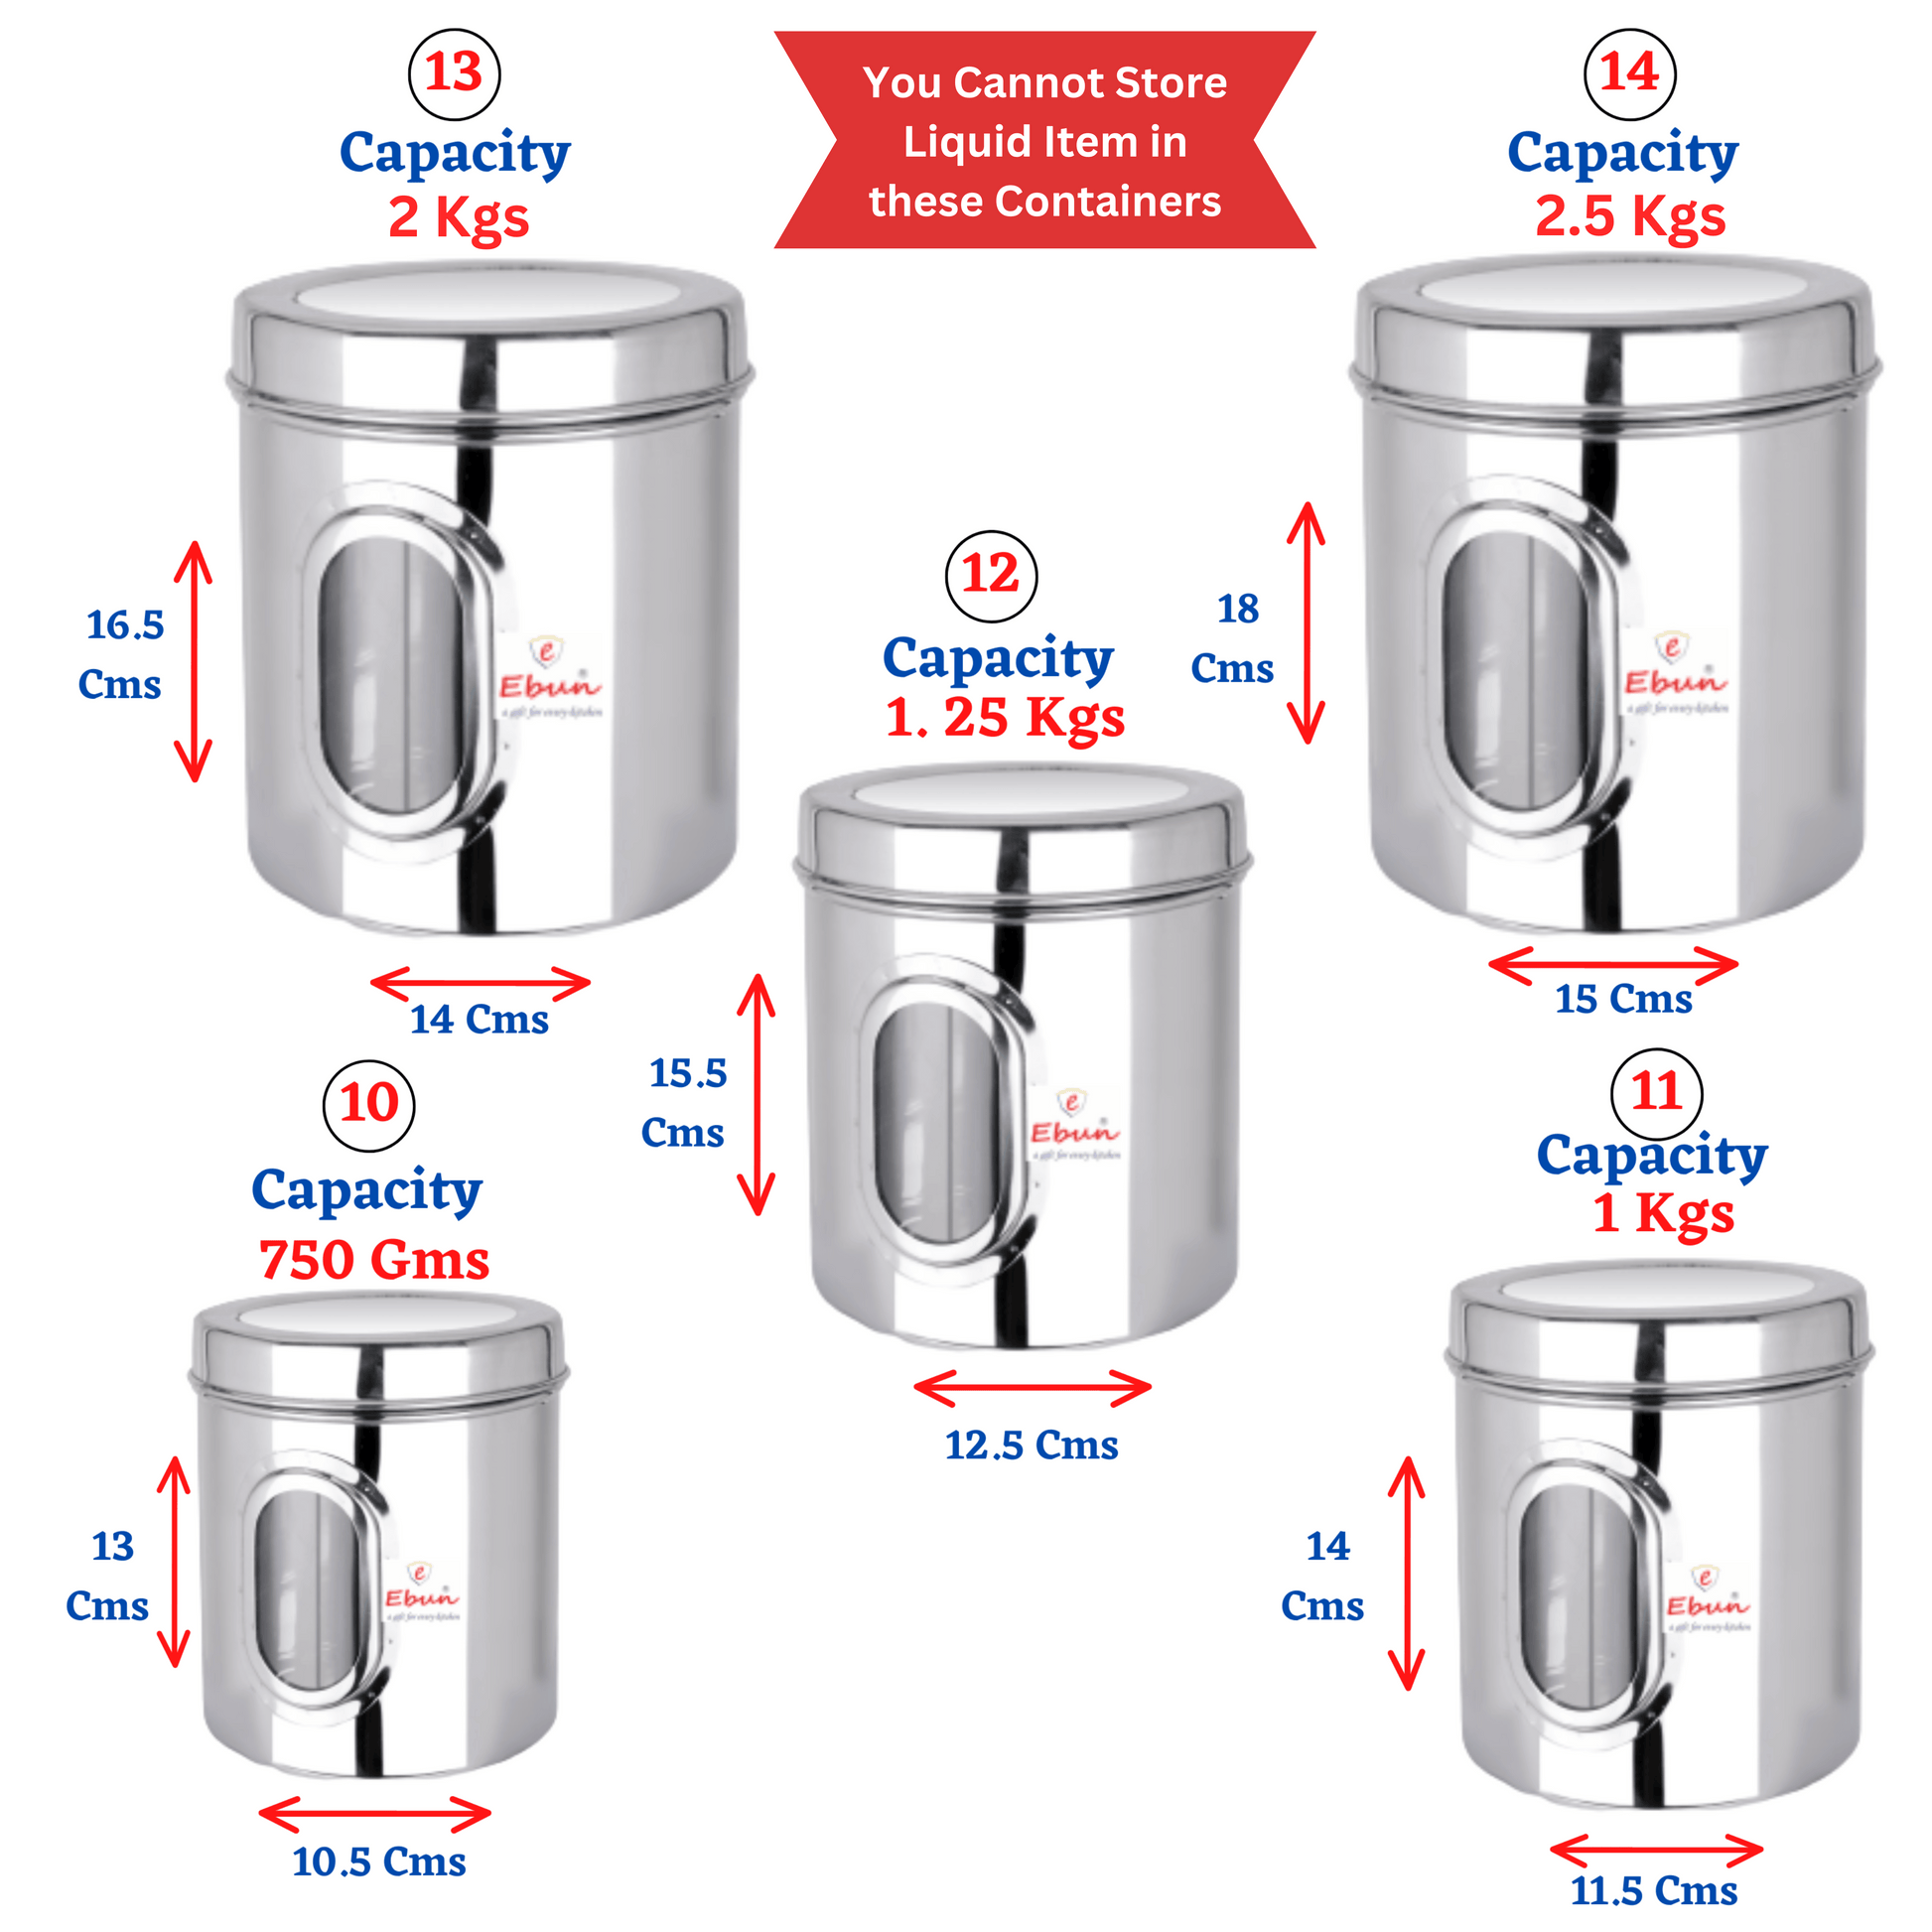 stainless steel containers | steel storage containers for kitchen | steel container | steel container with lid | kitchen containers set steel | steel container for kitchen storage set | steel containers | stainless steel storage containers |  stainless steel containers with lid | kitchen steel containers set | stainless steel container | steel airtight container | steel storage containers